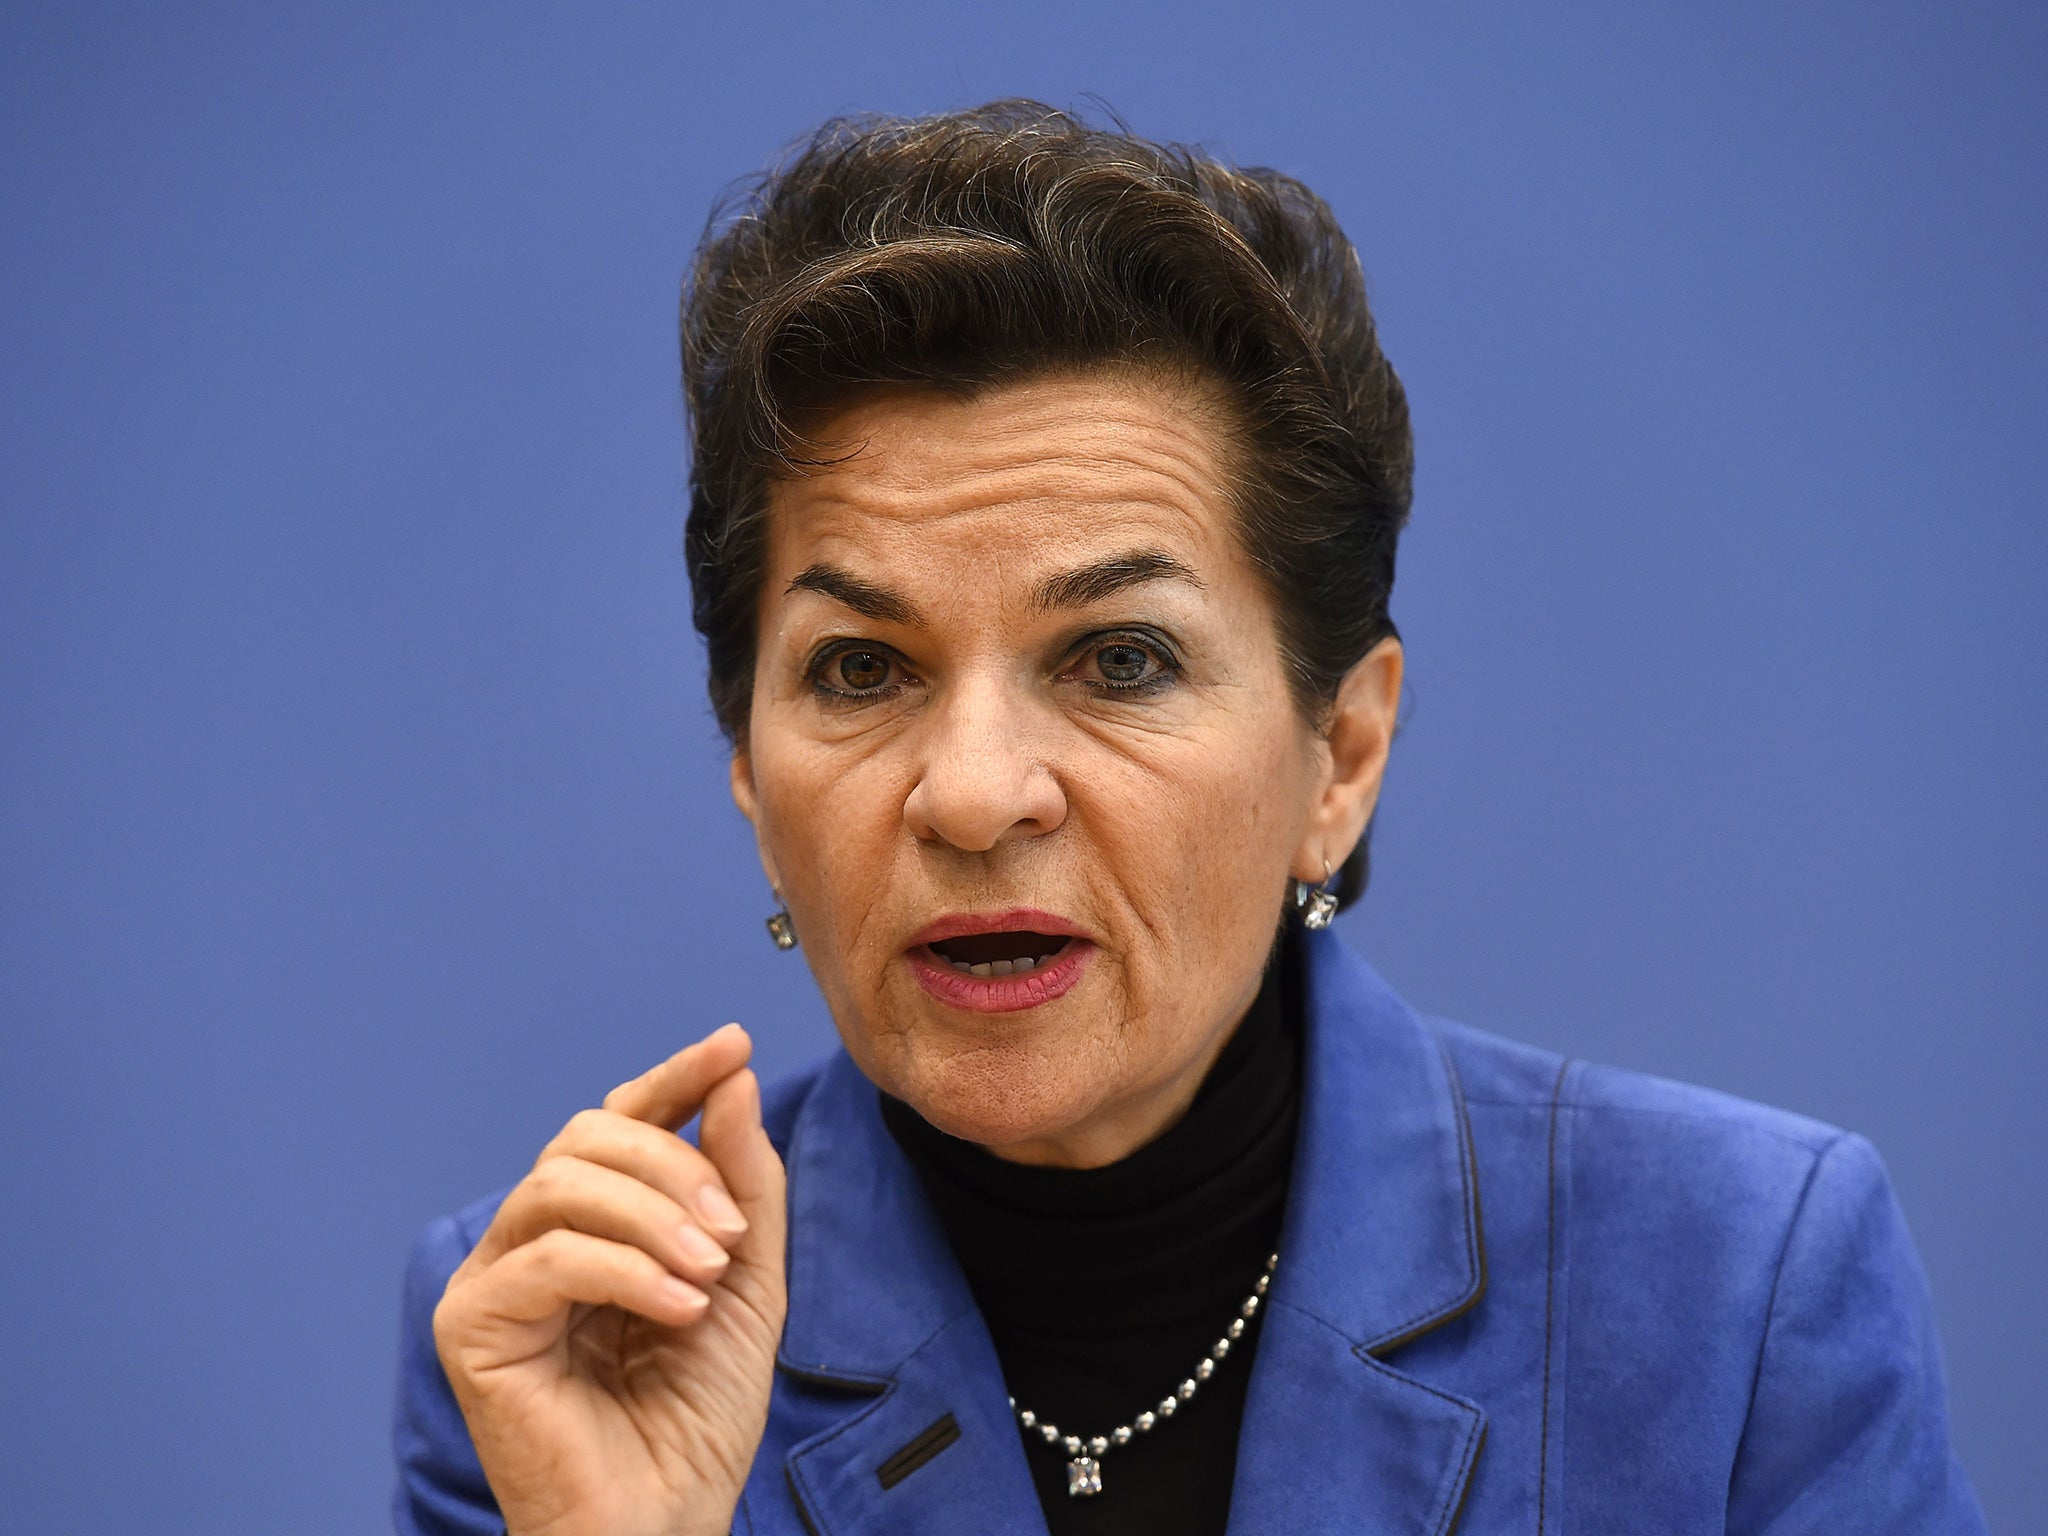 Christiana Figueres, the UN’s climate chief, says gender is a central issue